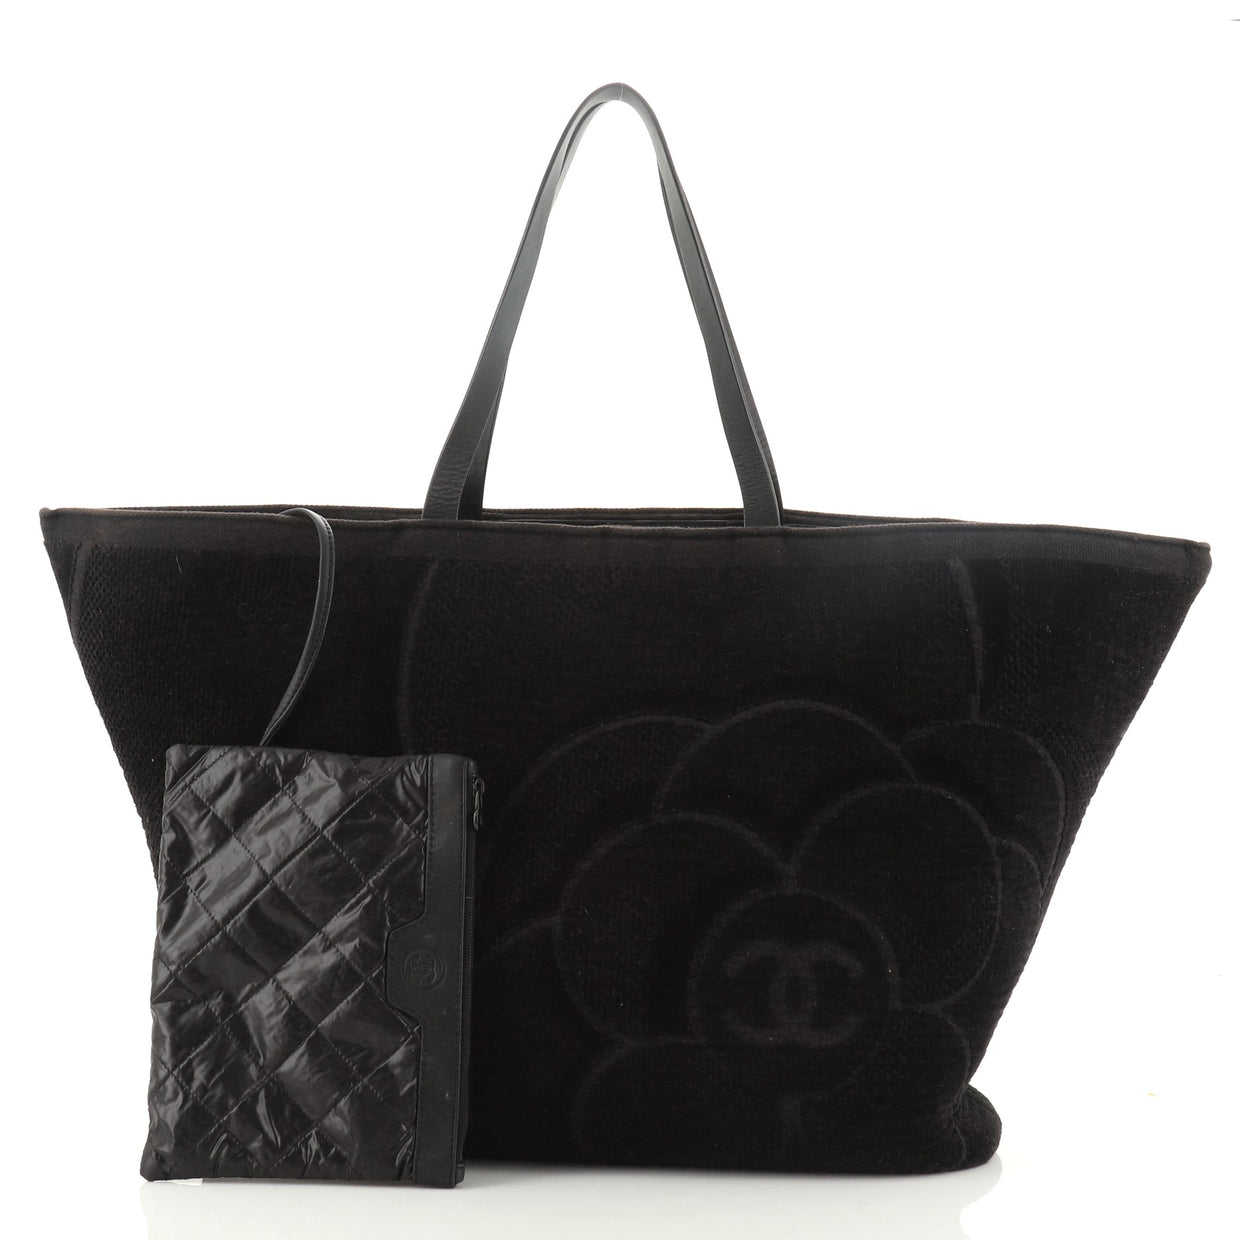 Chanel Beach Tote Camellia Terry Cloth Large Black 545909